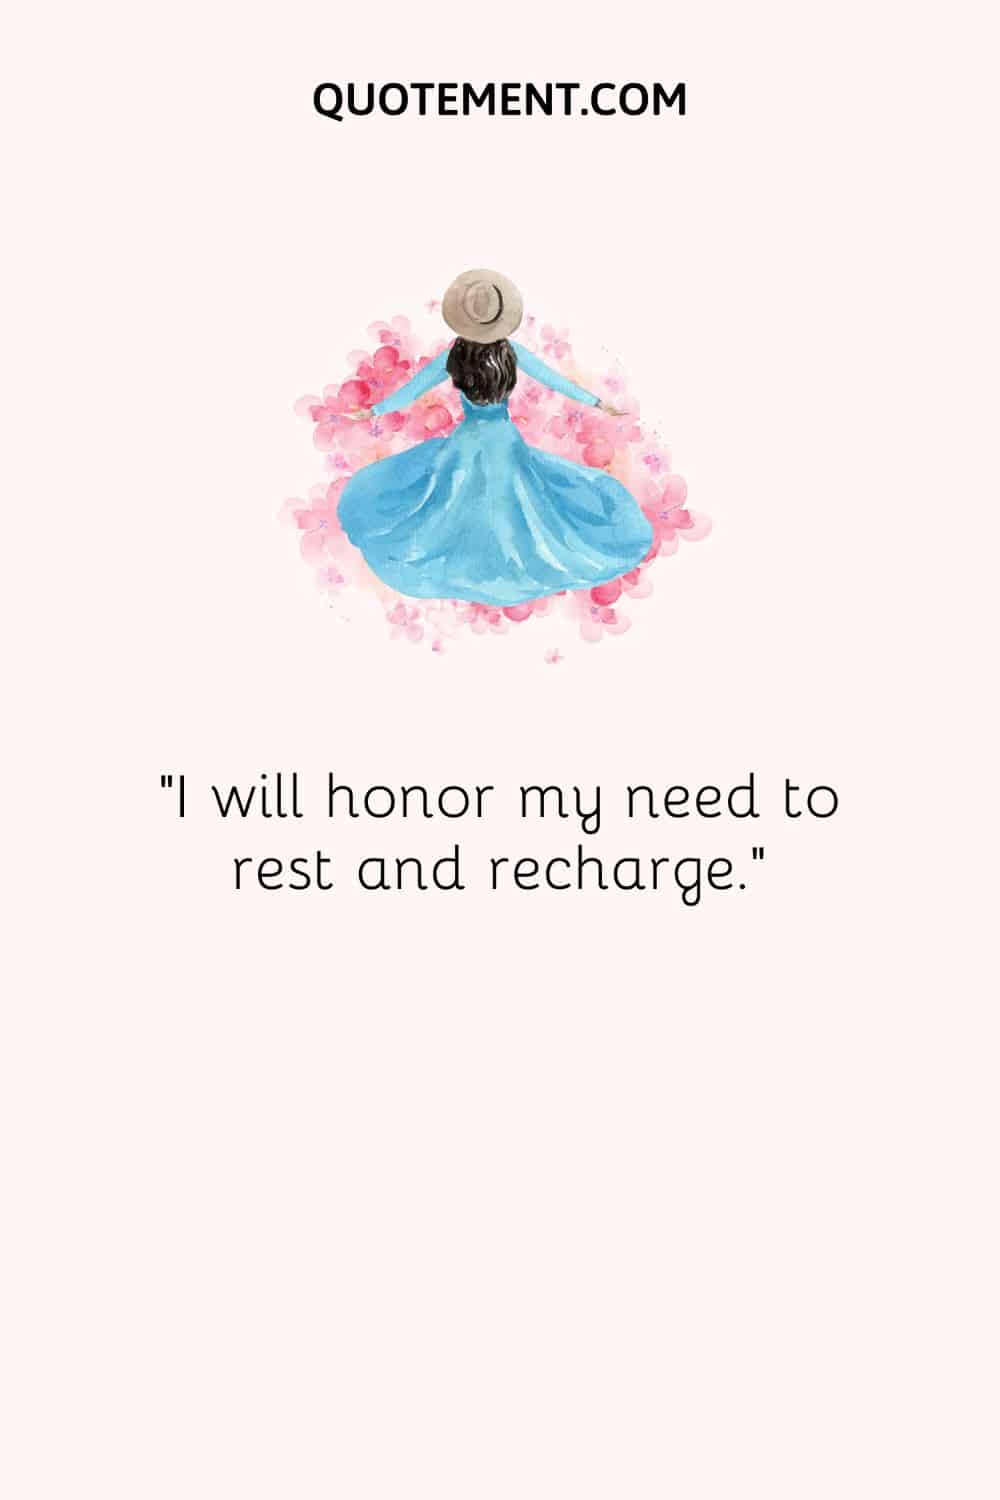 I will honor my need to rest and recharge